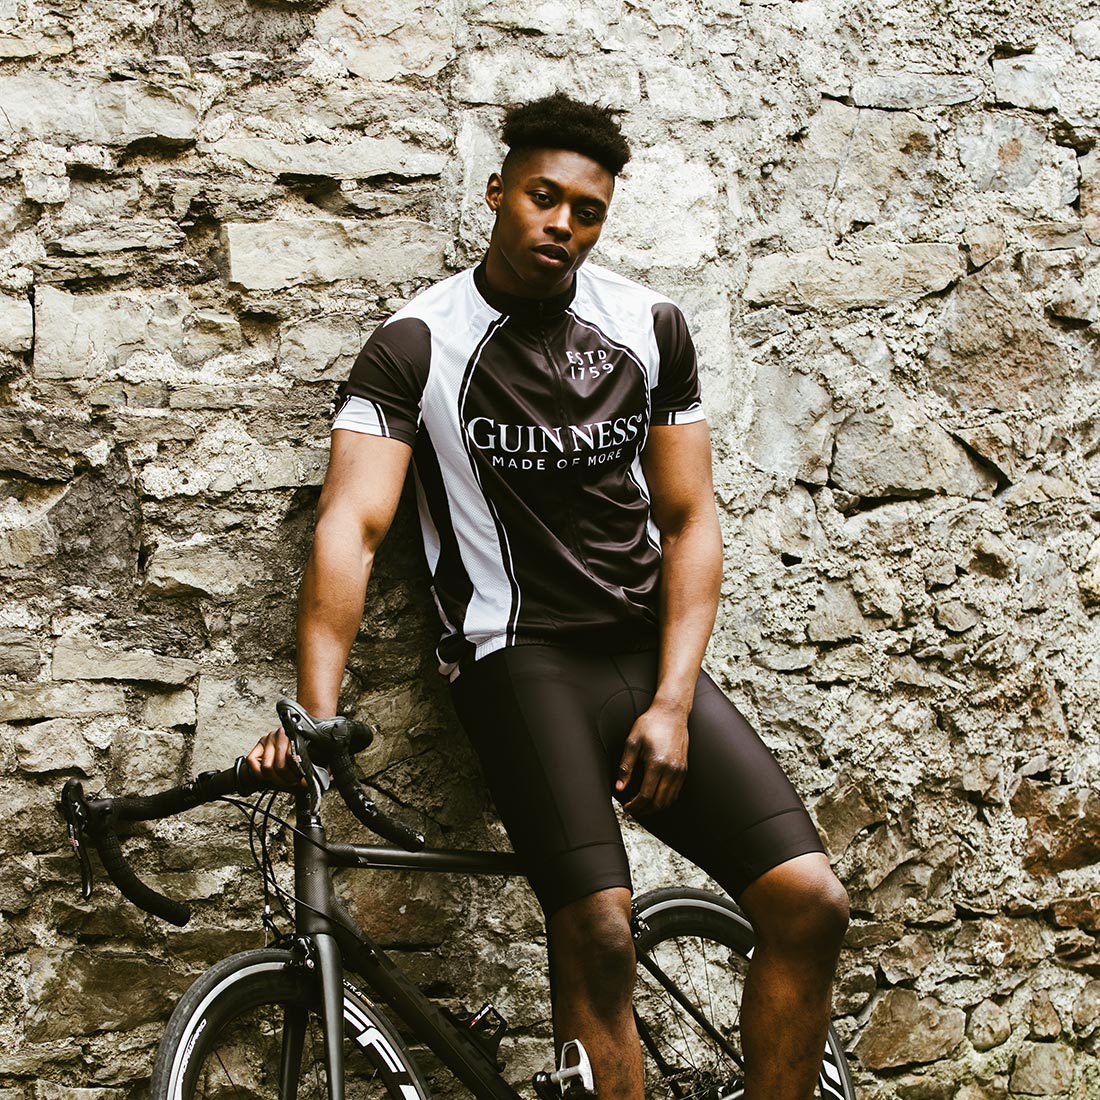 Guinness Cycling Jersey